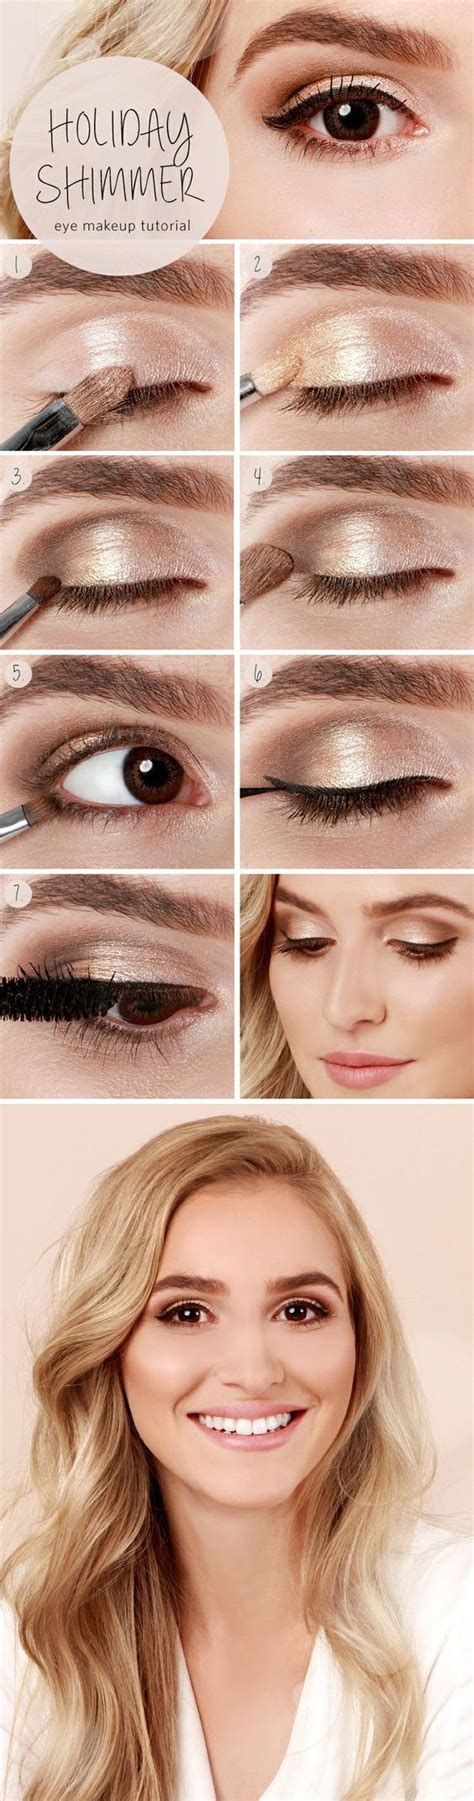 10 Amazing Eye Makeup Tutorials To Turn You Into A Beauty Whizz Make Up Tutorials Best Makeup